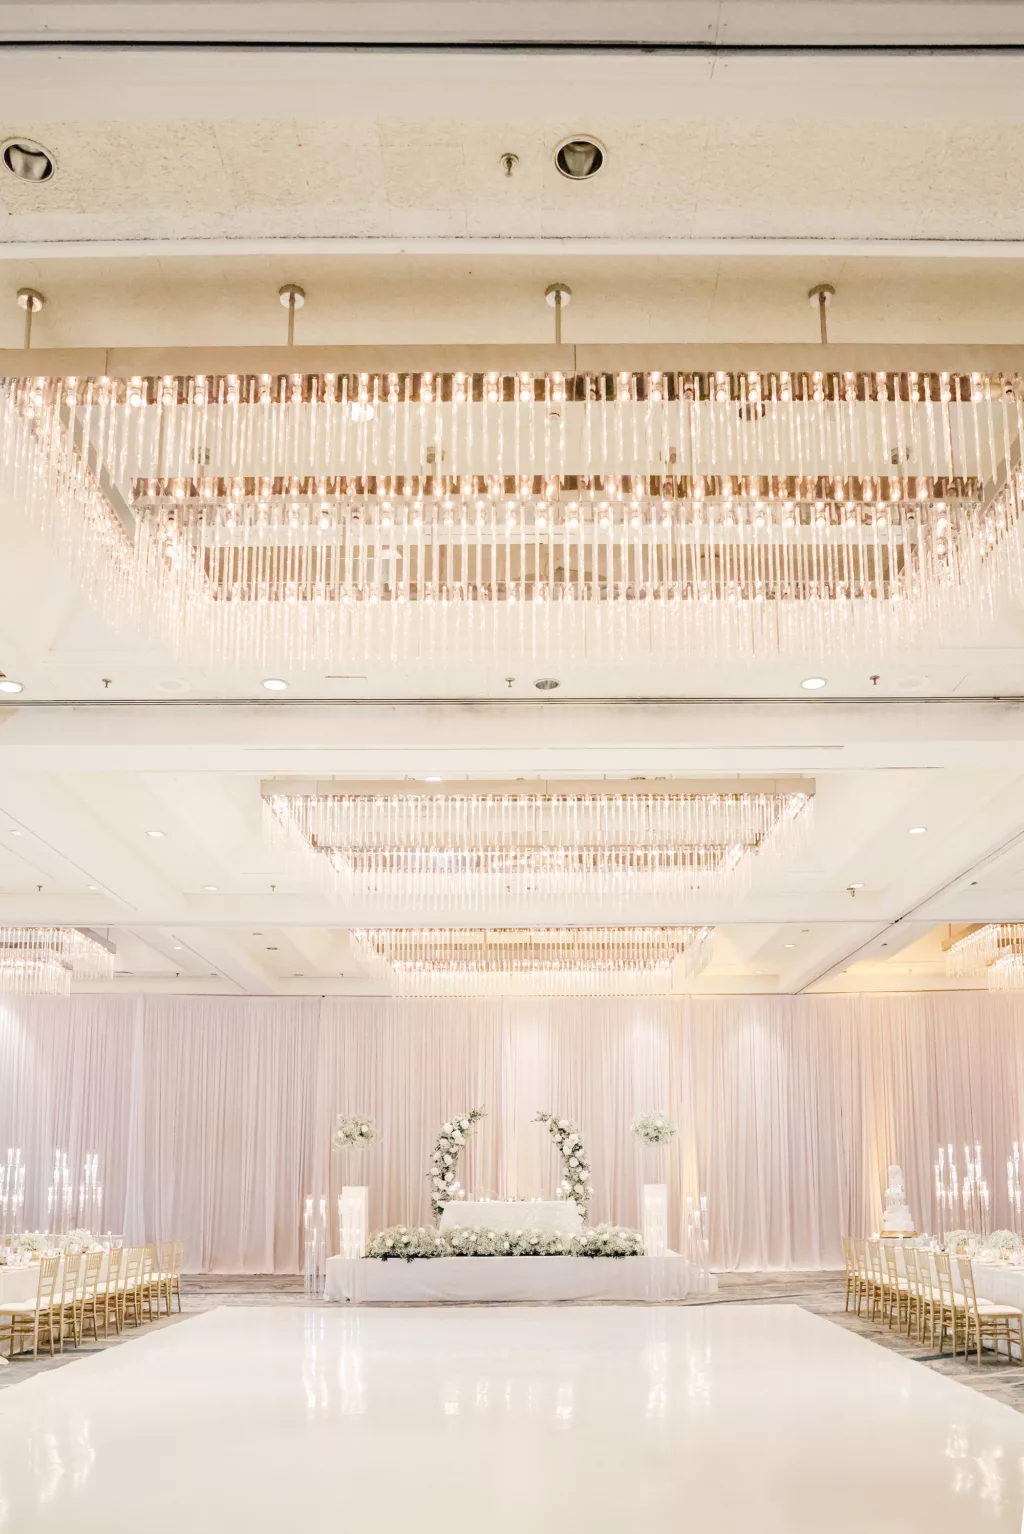 Extravagant Ivory, White, and Gold Wedding Reception Decor Inspiration | Tampa Bay Hotel Venue Hilton Tampa Downtown | Planner Special Moments Event Planning | Photographer Lifelong Photography Studio